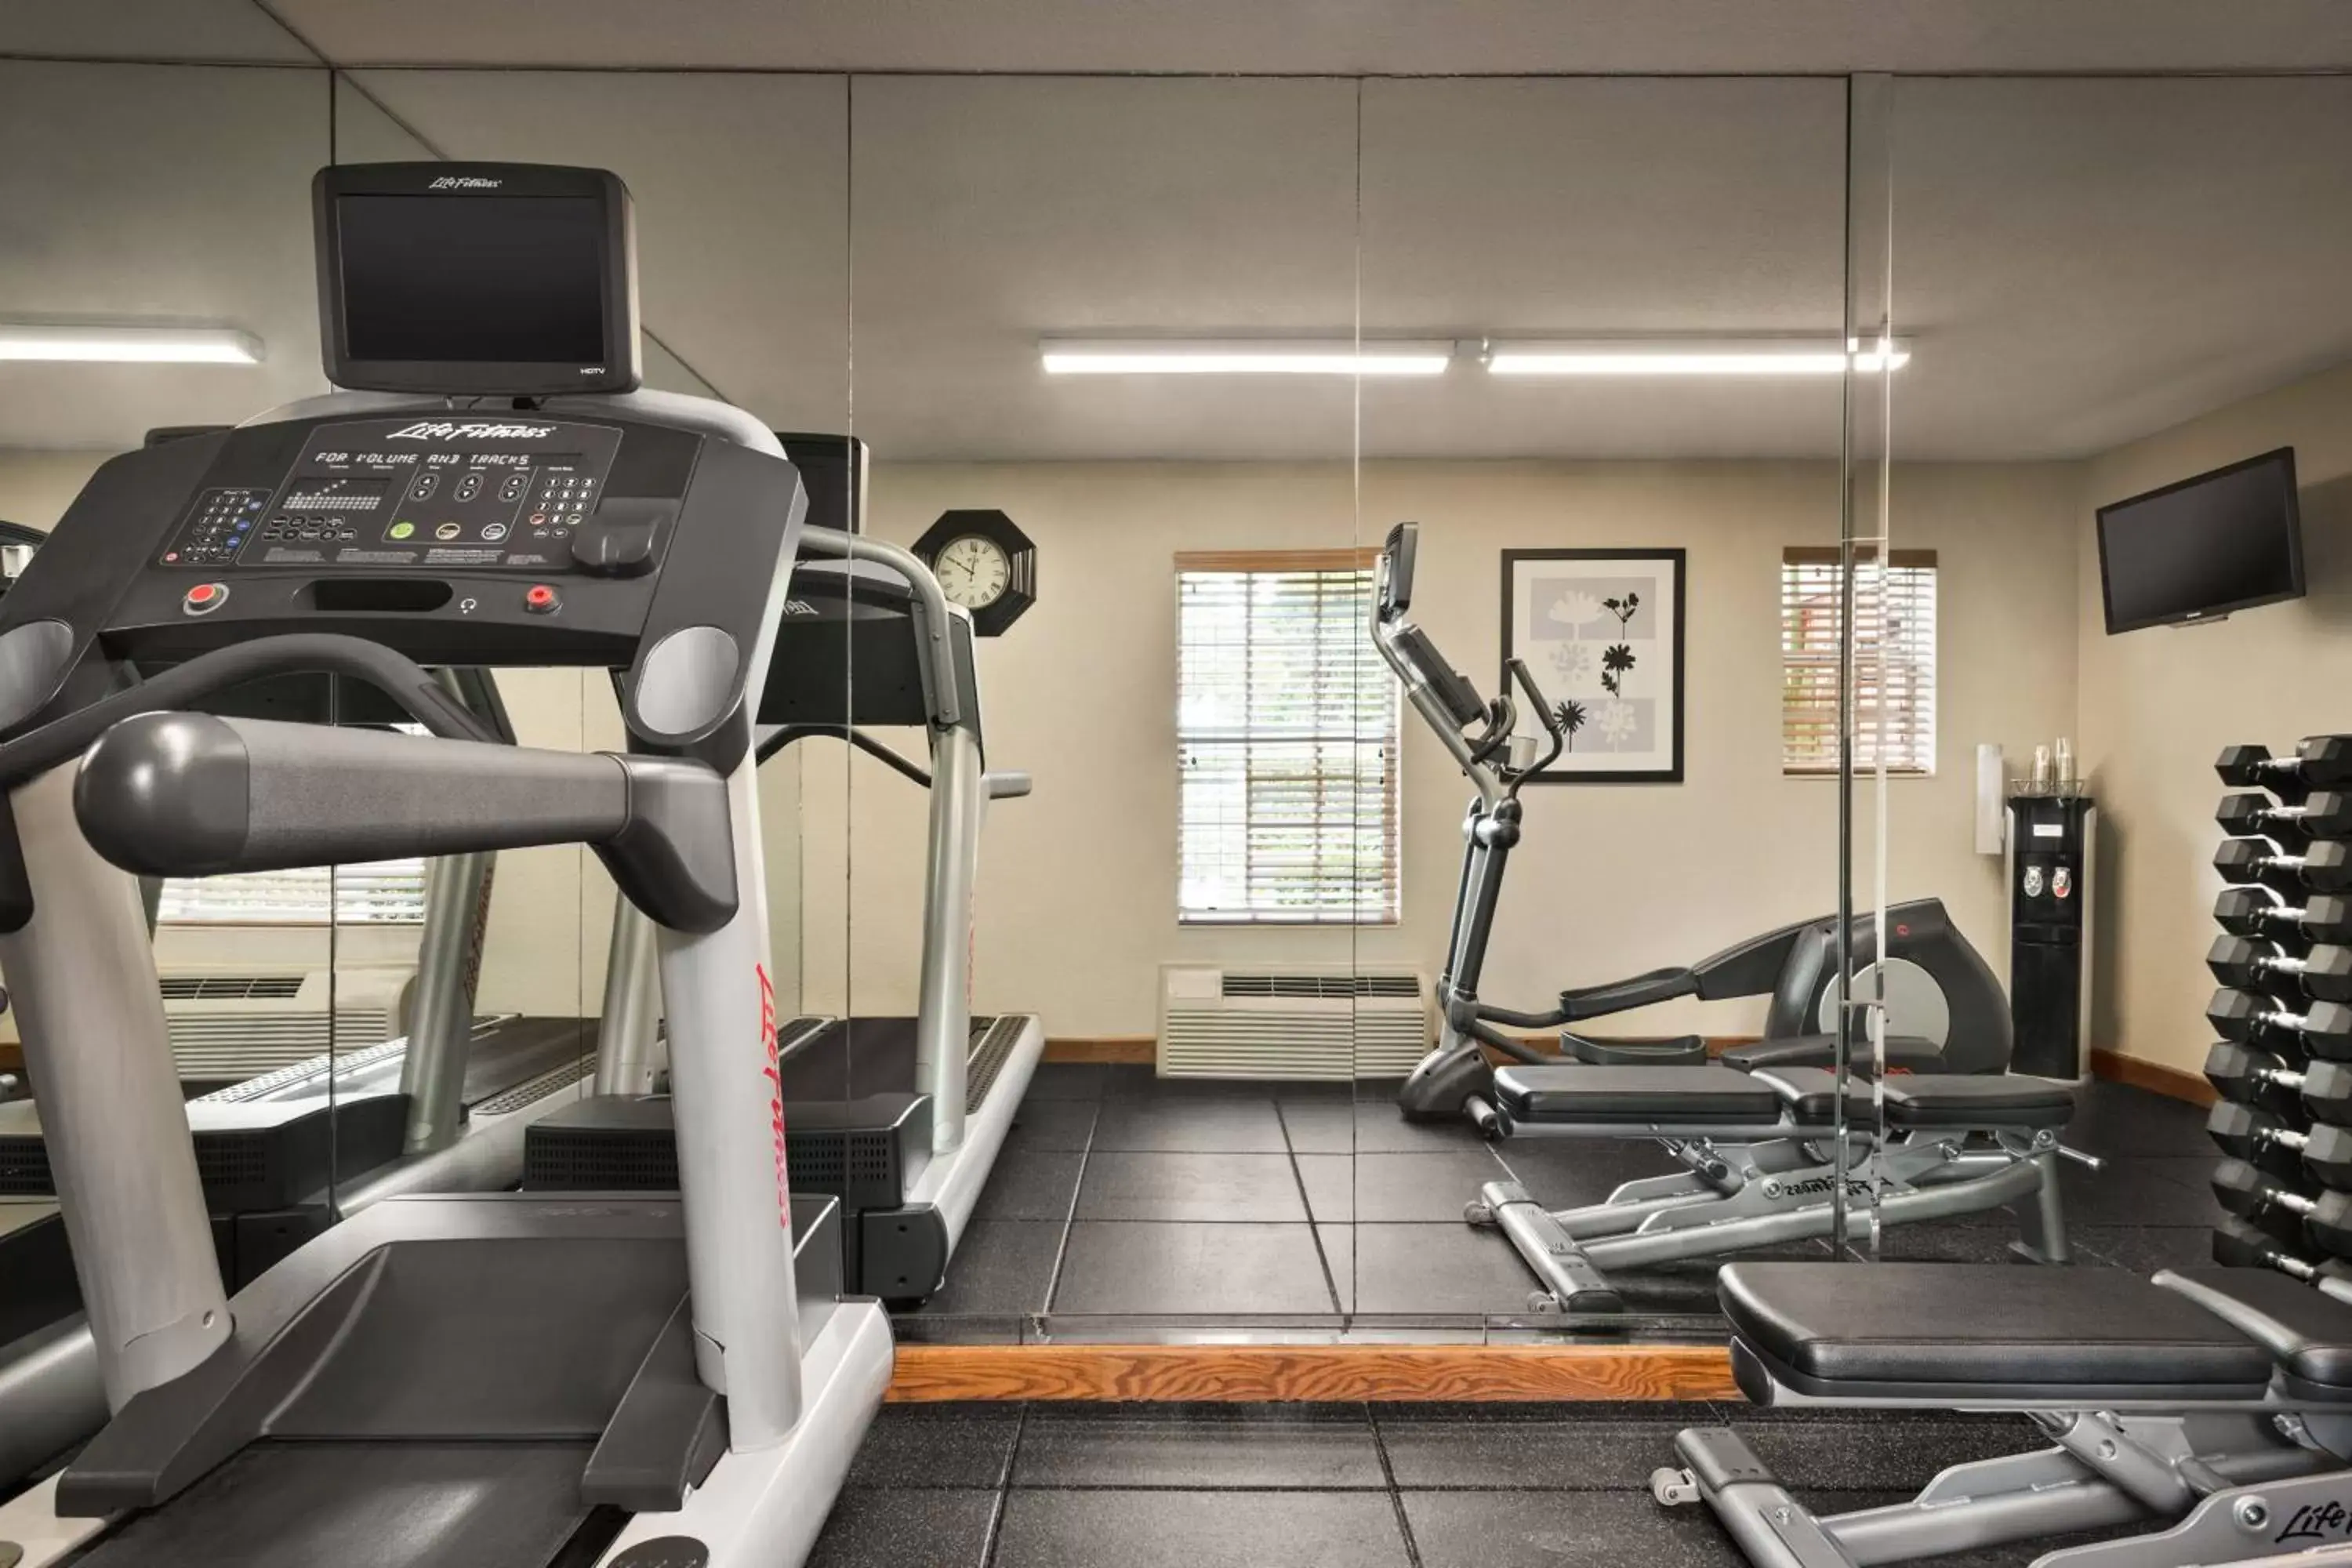 Fitness centre/facilities, Fitness Center/Facilities in TownePlace Suites Fort Lauderdale West